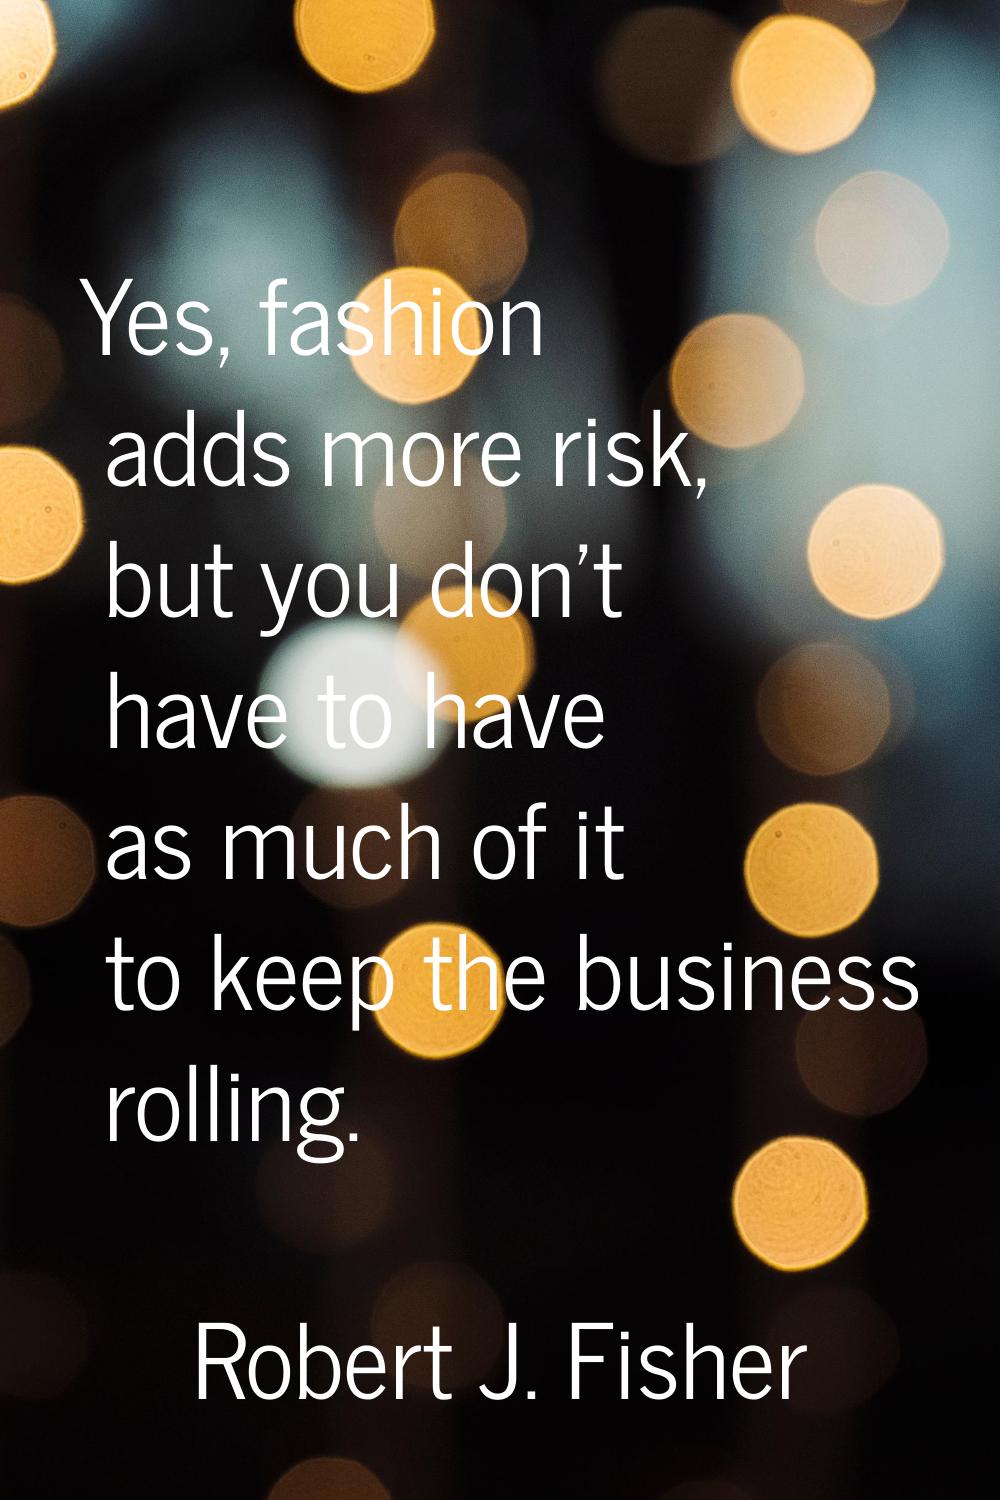 Yes, fashion adds more risk, but you don't have to have as much of it to keep the business rolling.